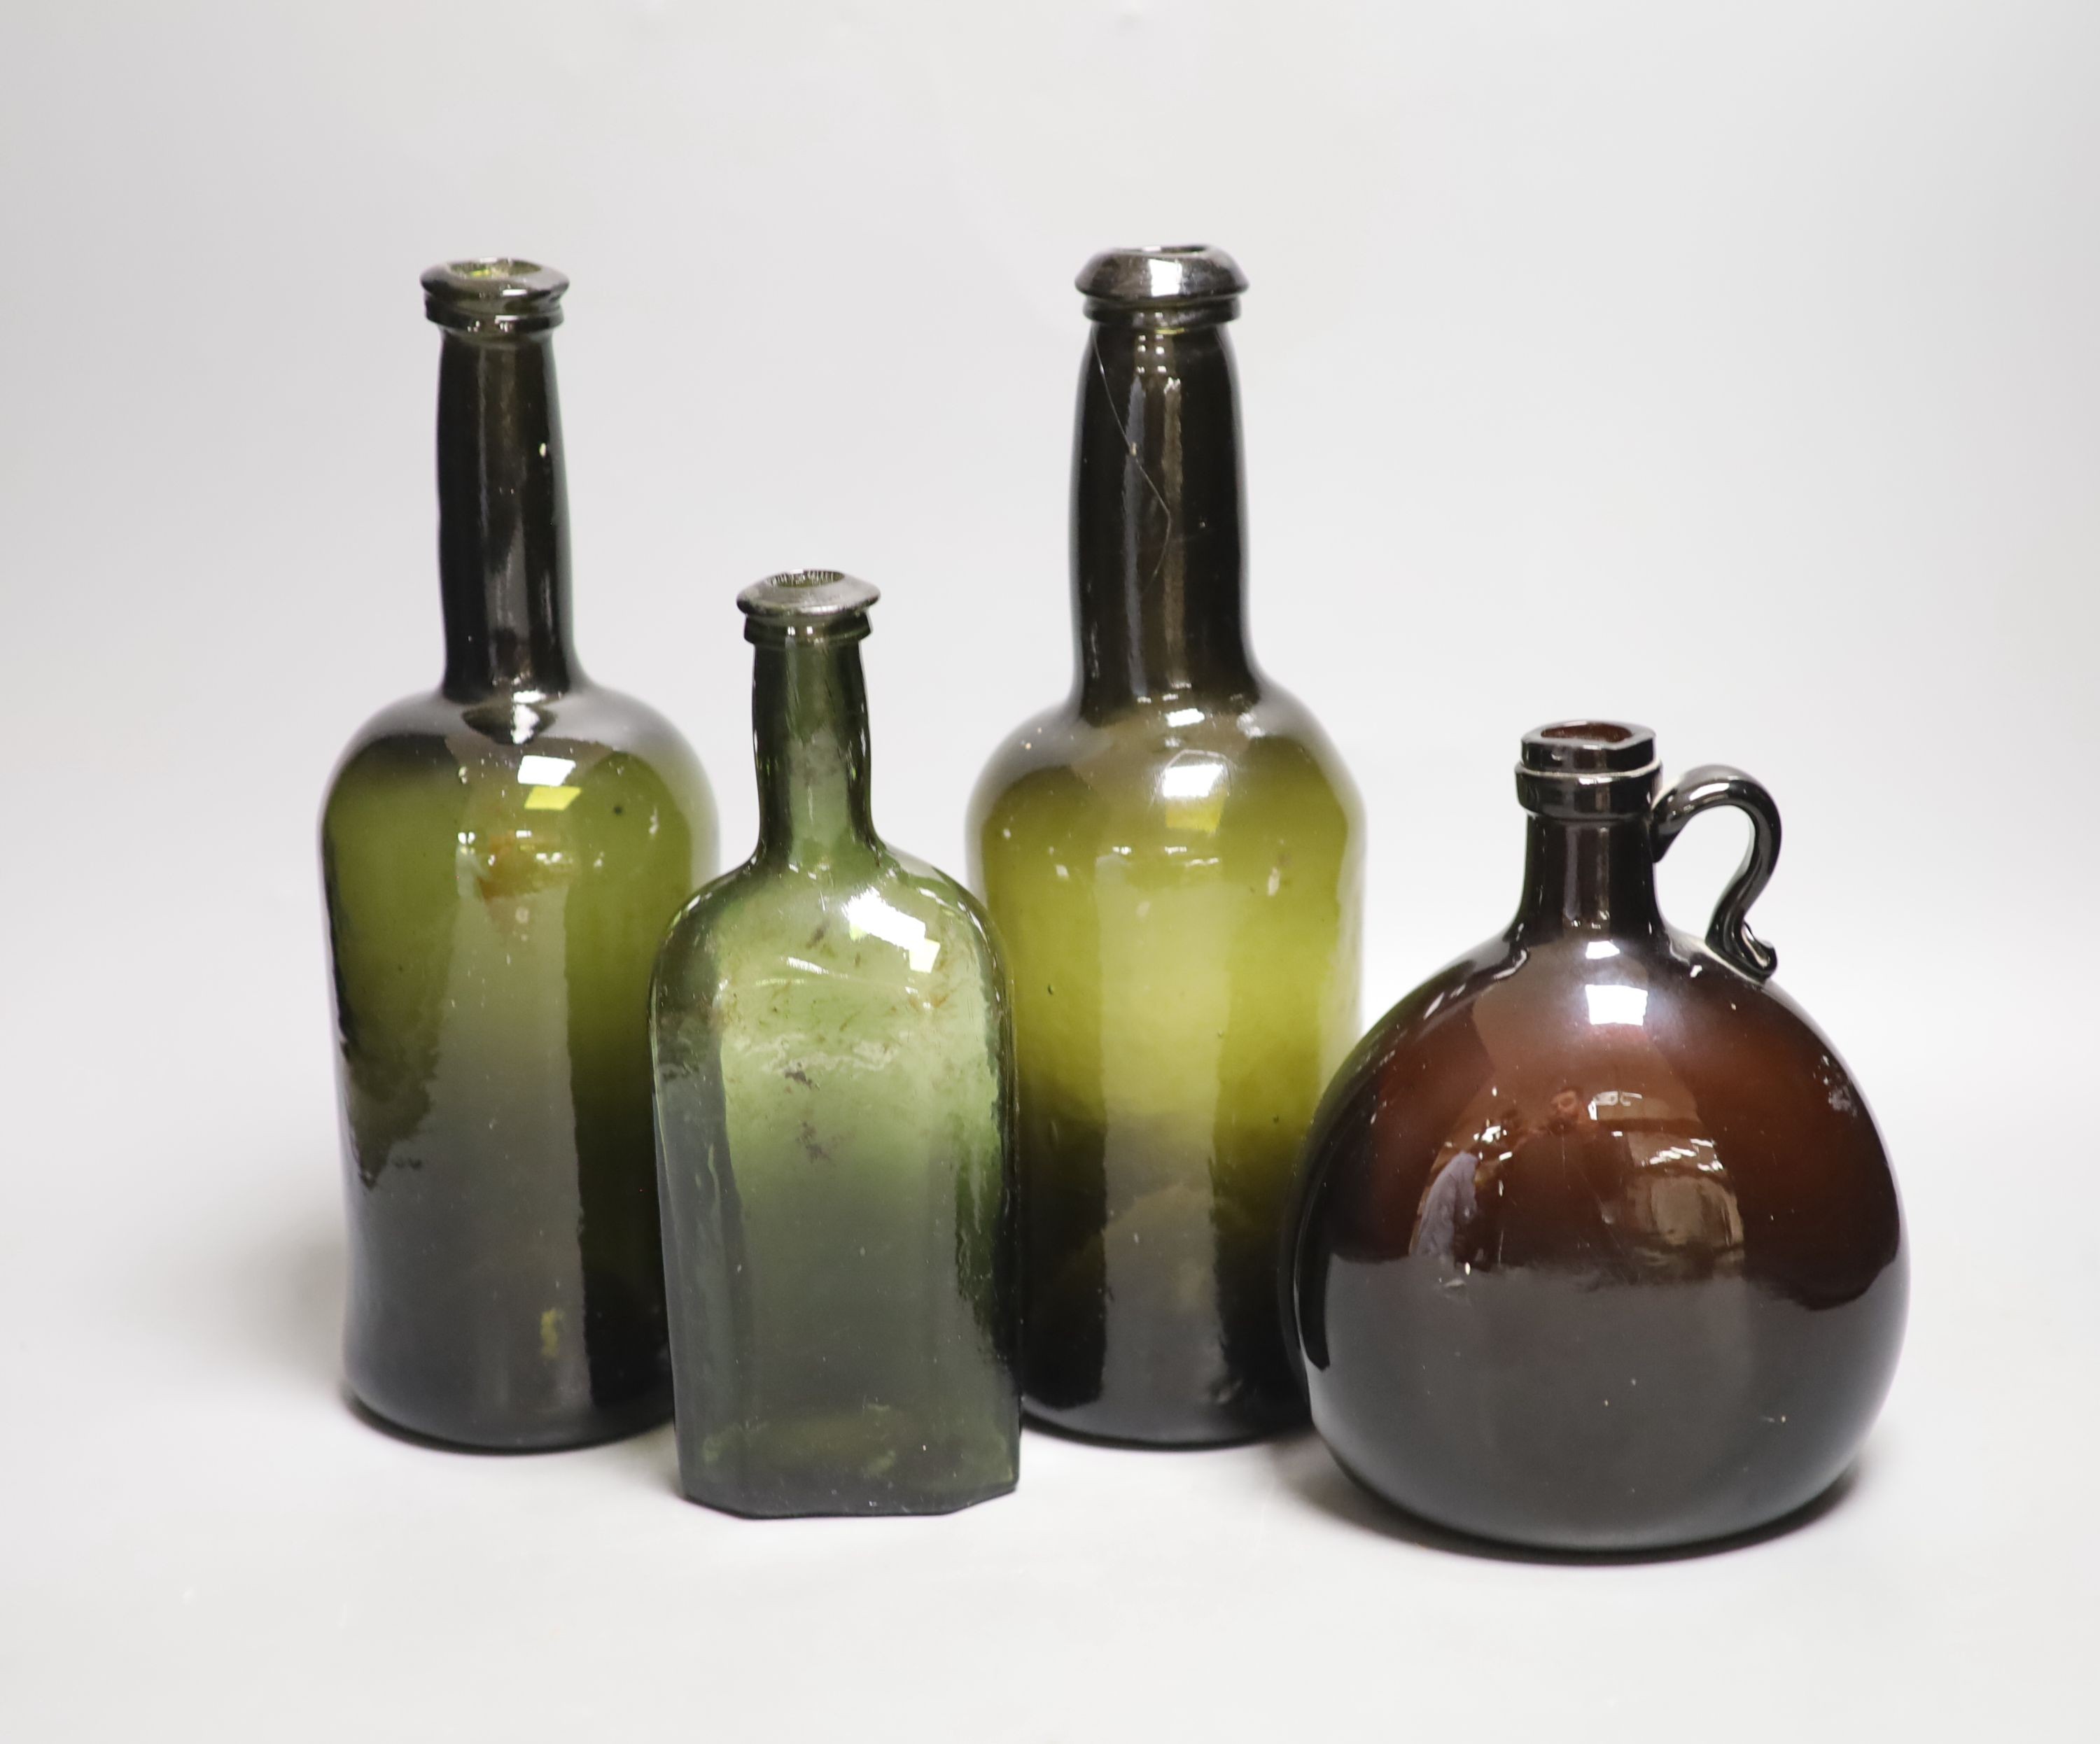 Two English dark green glass wine bottles, late 18th century, a Victorian amber glass hock jug and an early 19th century dark green glass small bottle, tallest 26.5cm (4)